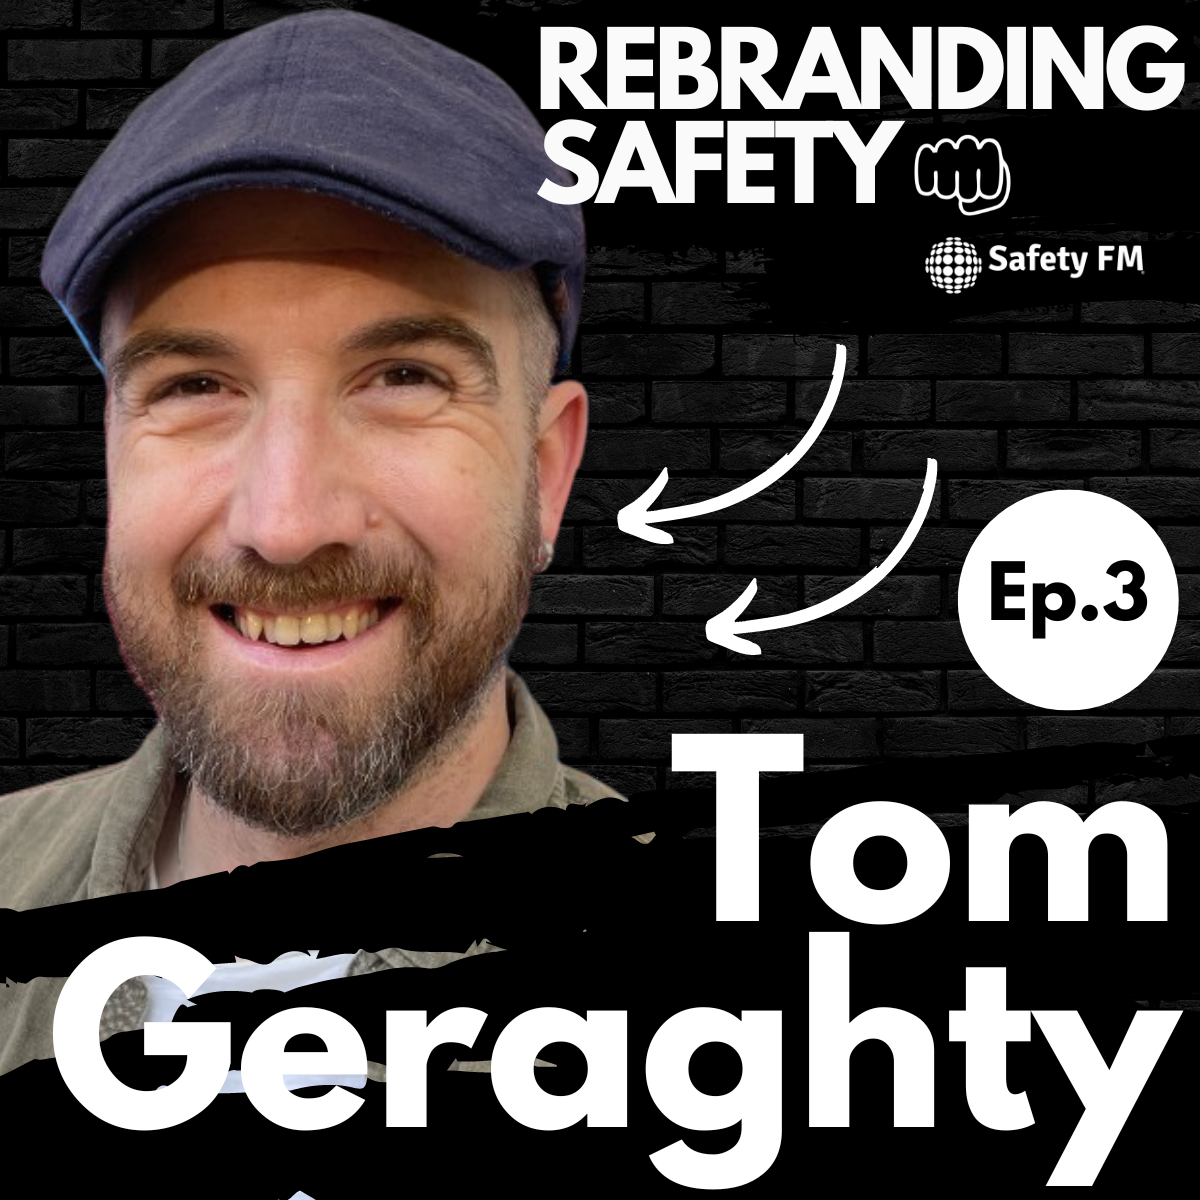 Rebranding Safety with Tom Geraghty - ’Work as Done’ vs ’Work as Imagined’